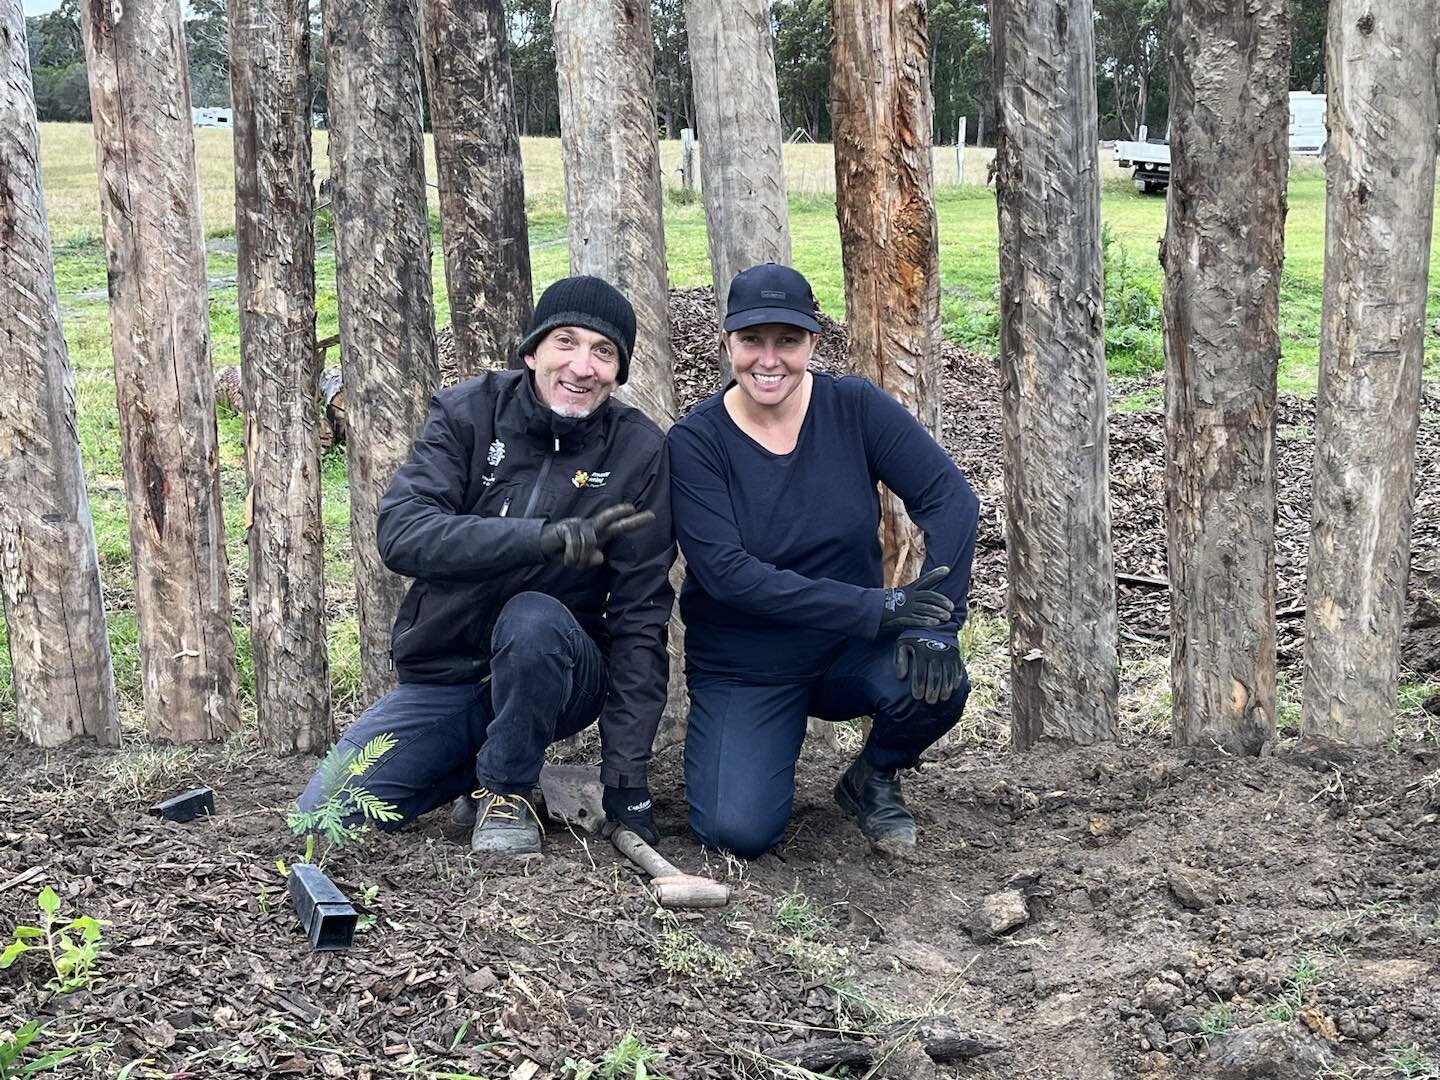 Nice to chat and plant with Darren from Royal Botanic Gardens. Darren is connecting with community on wonderful project.